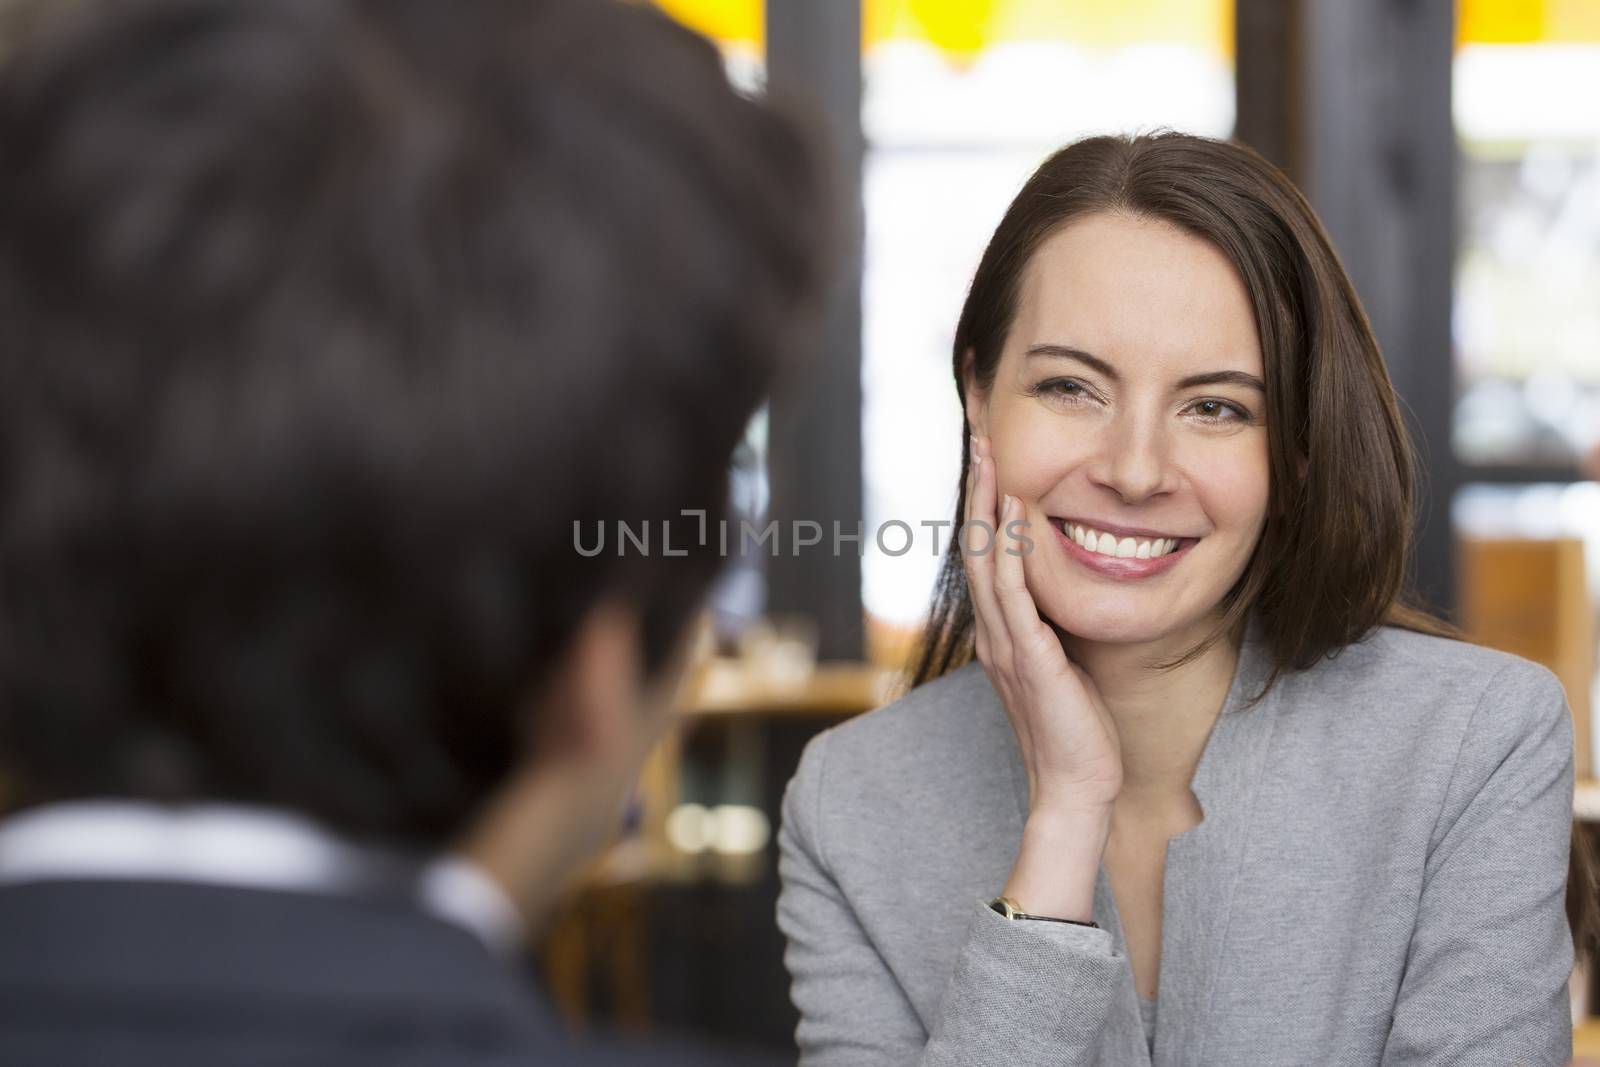 Portrait of beautiful woman during a lunch with a man in restaur by LDProd